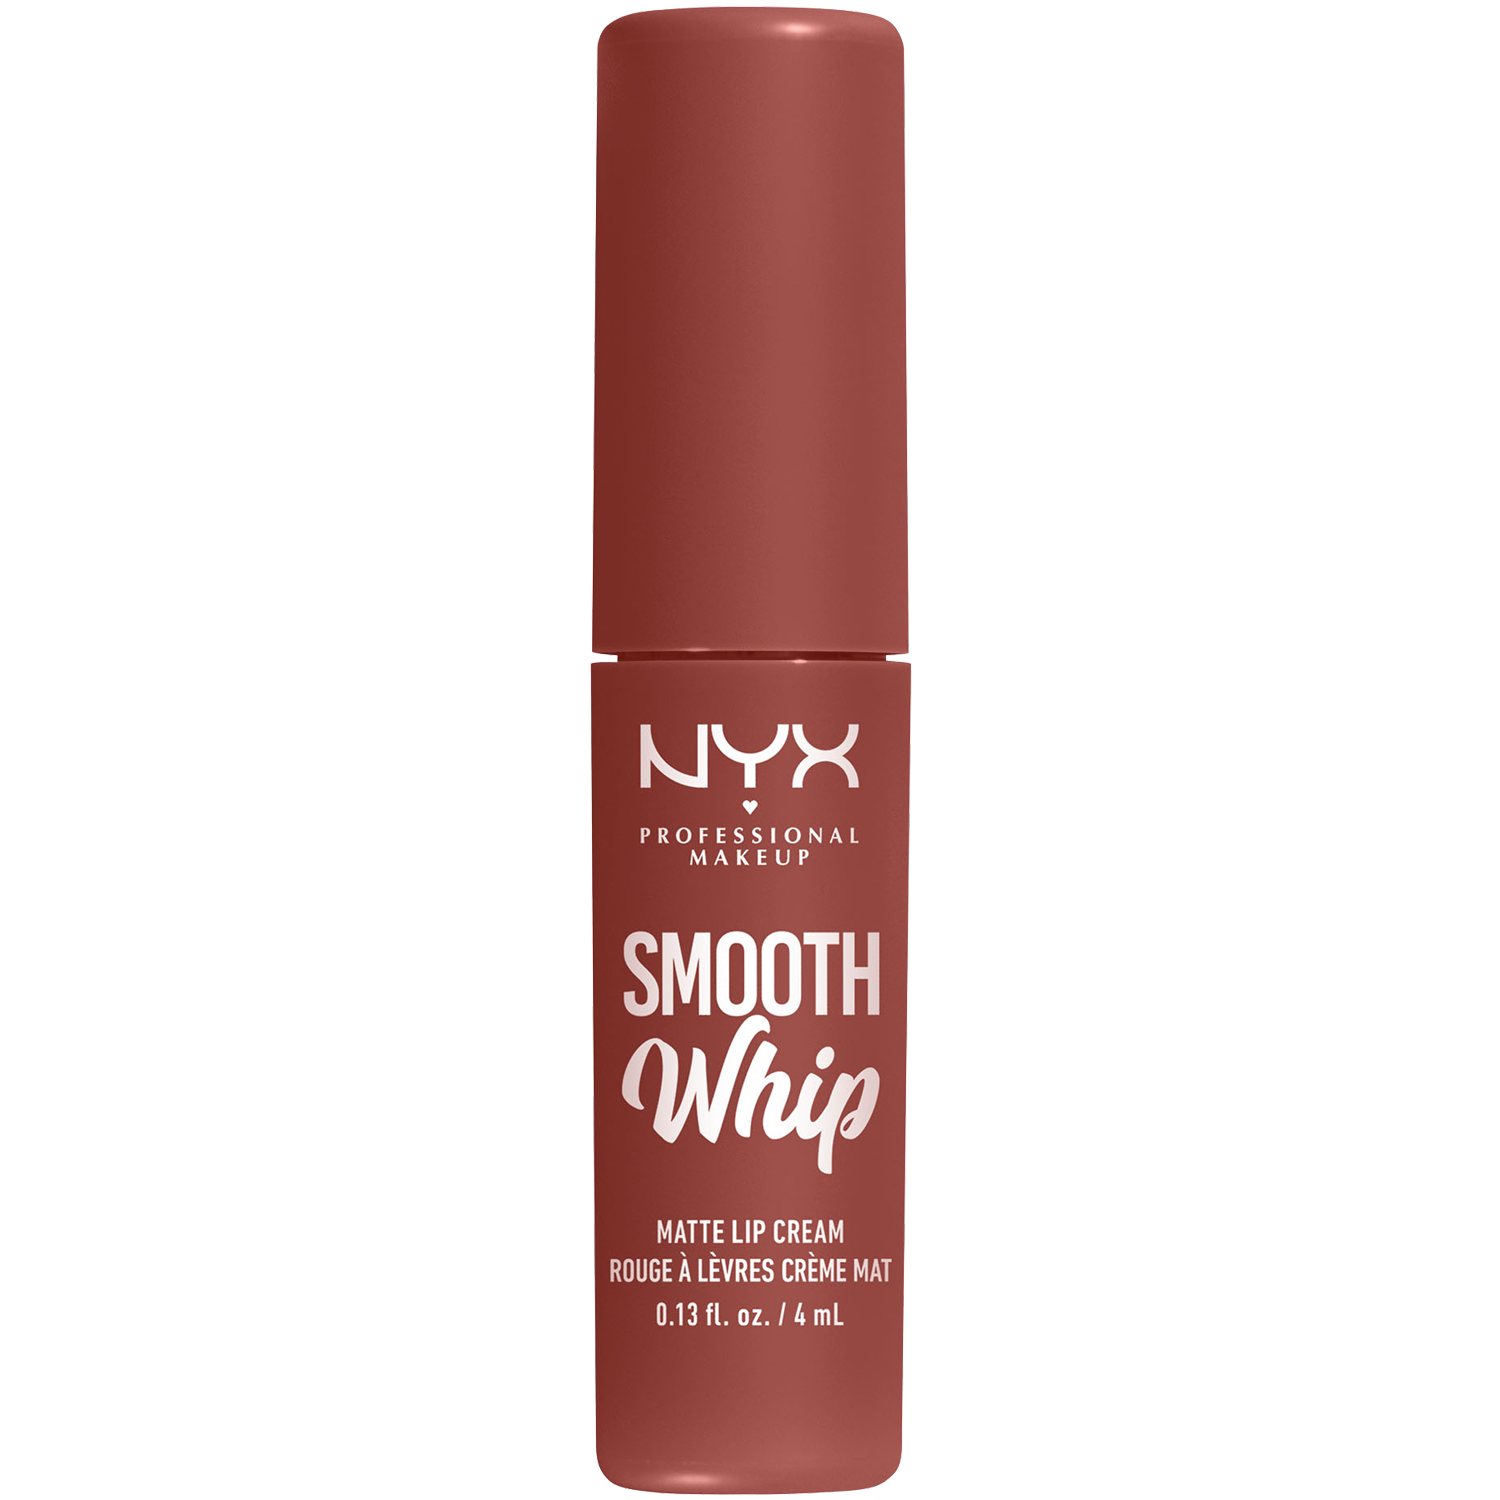 NYX Professional Makeup Smooth Whip